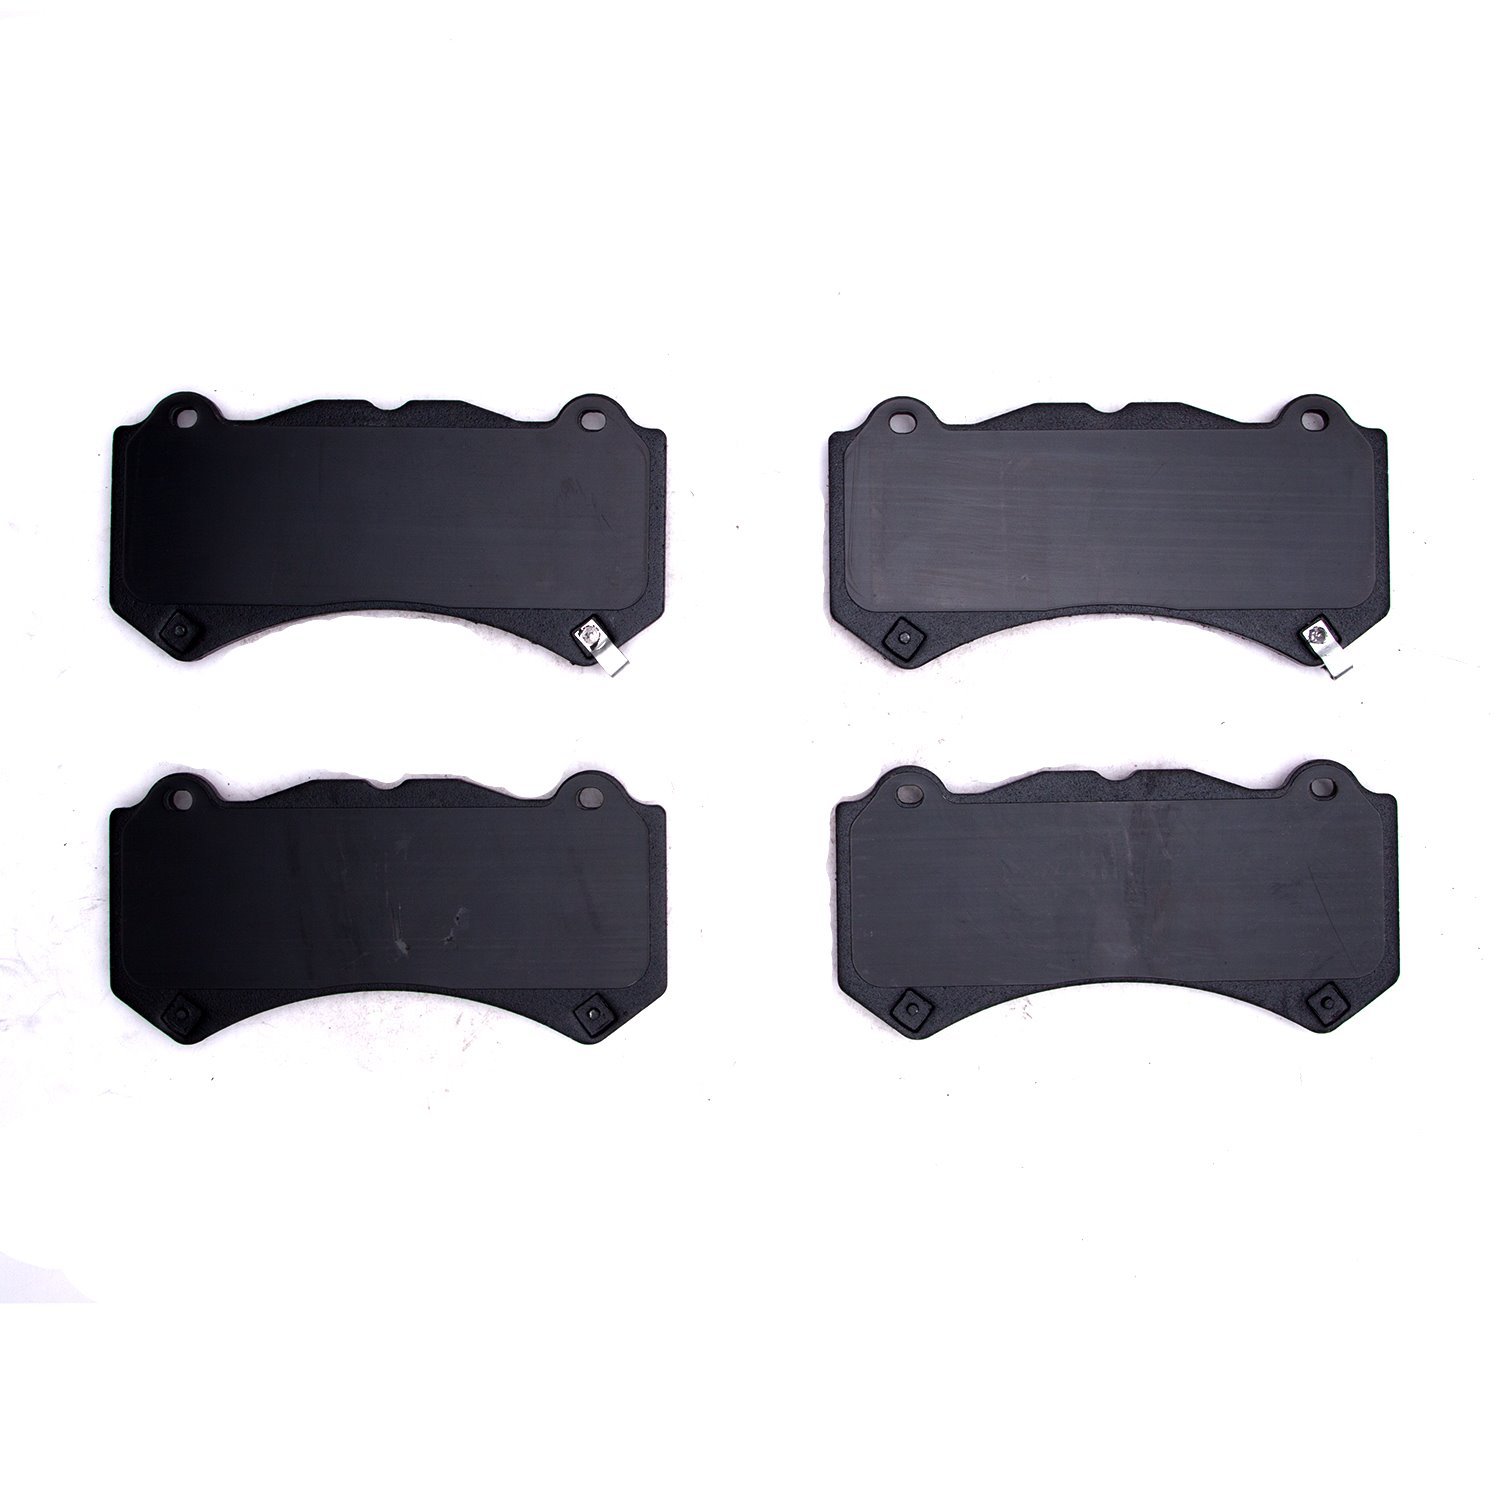 1551-1405-00 5000 Advanced Low-Metallic Brake Pads, Fits Select Multiple Makes/Models, Position: Front